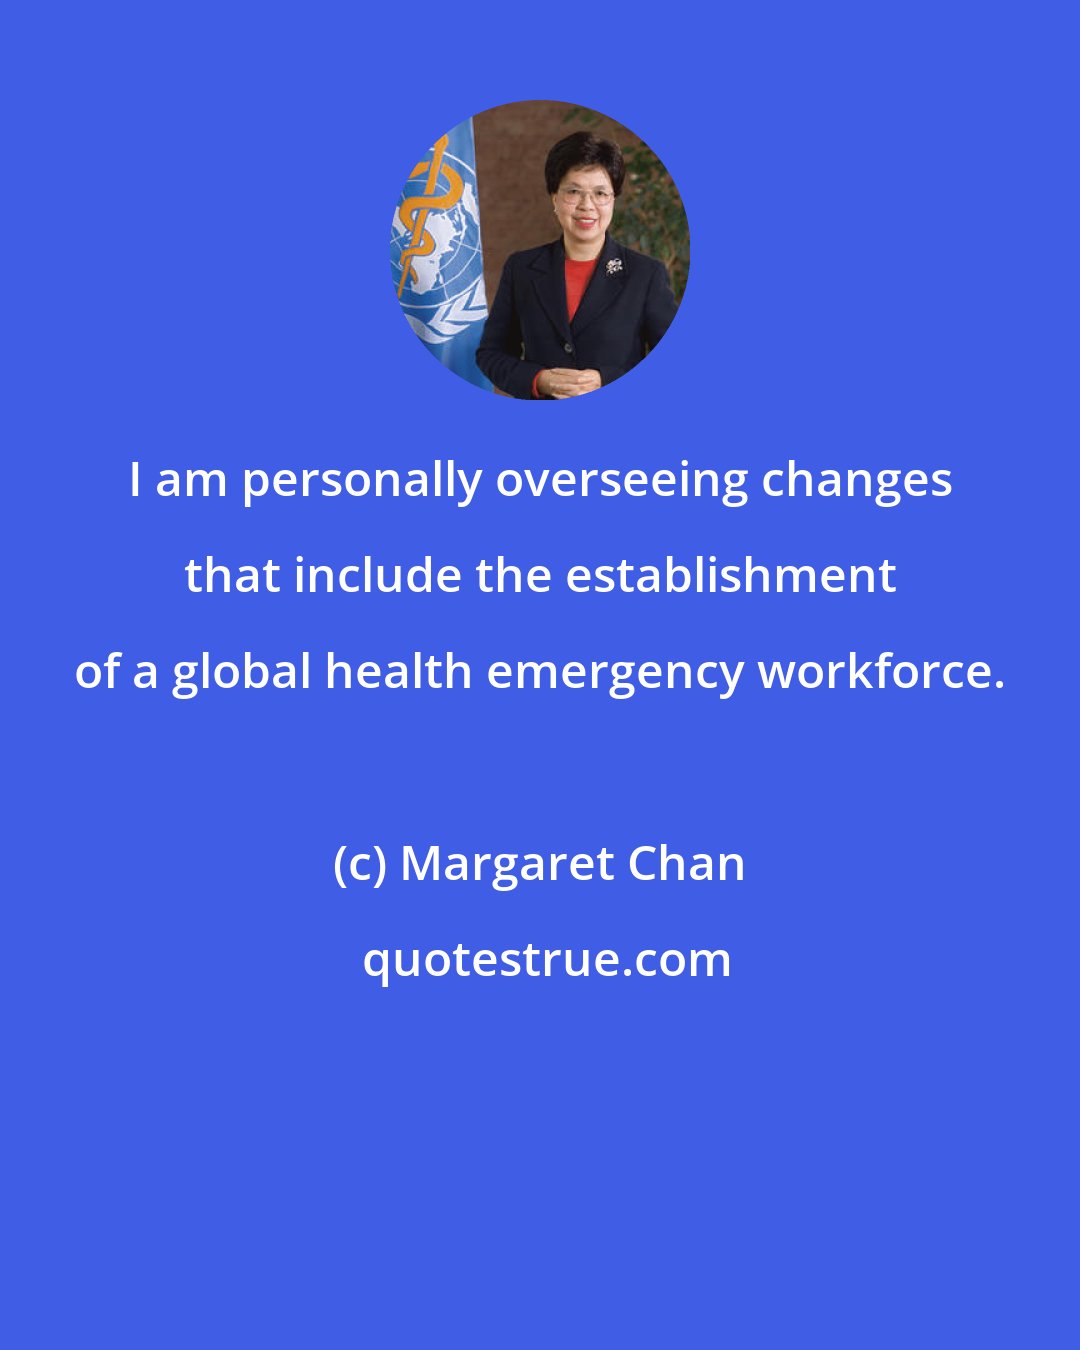 Margaret Chan: I am personally overseeing changes that include the establishment of a global health emergency workforce.